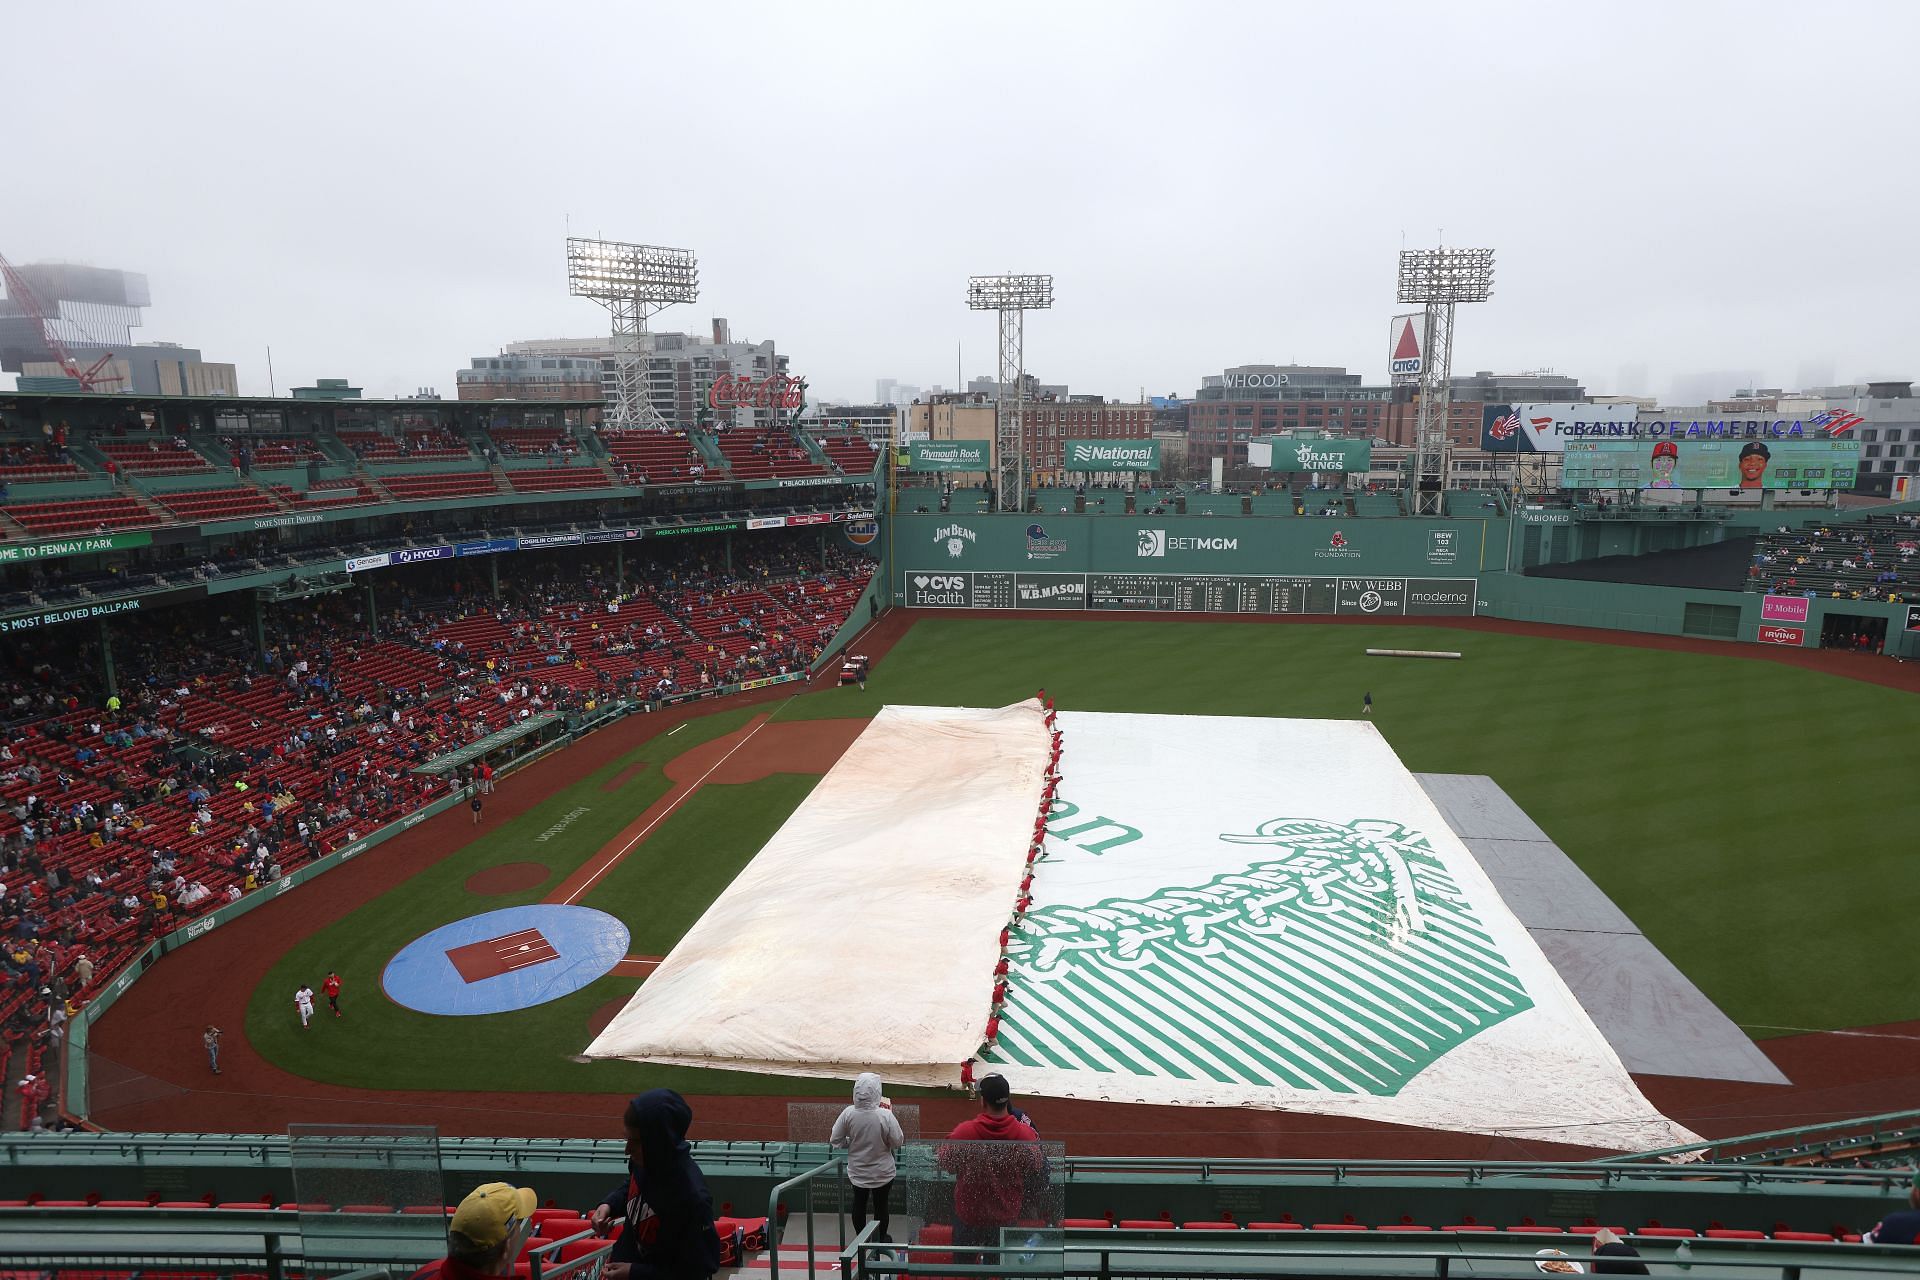 MLB Weather Report suggests no rain today